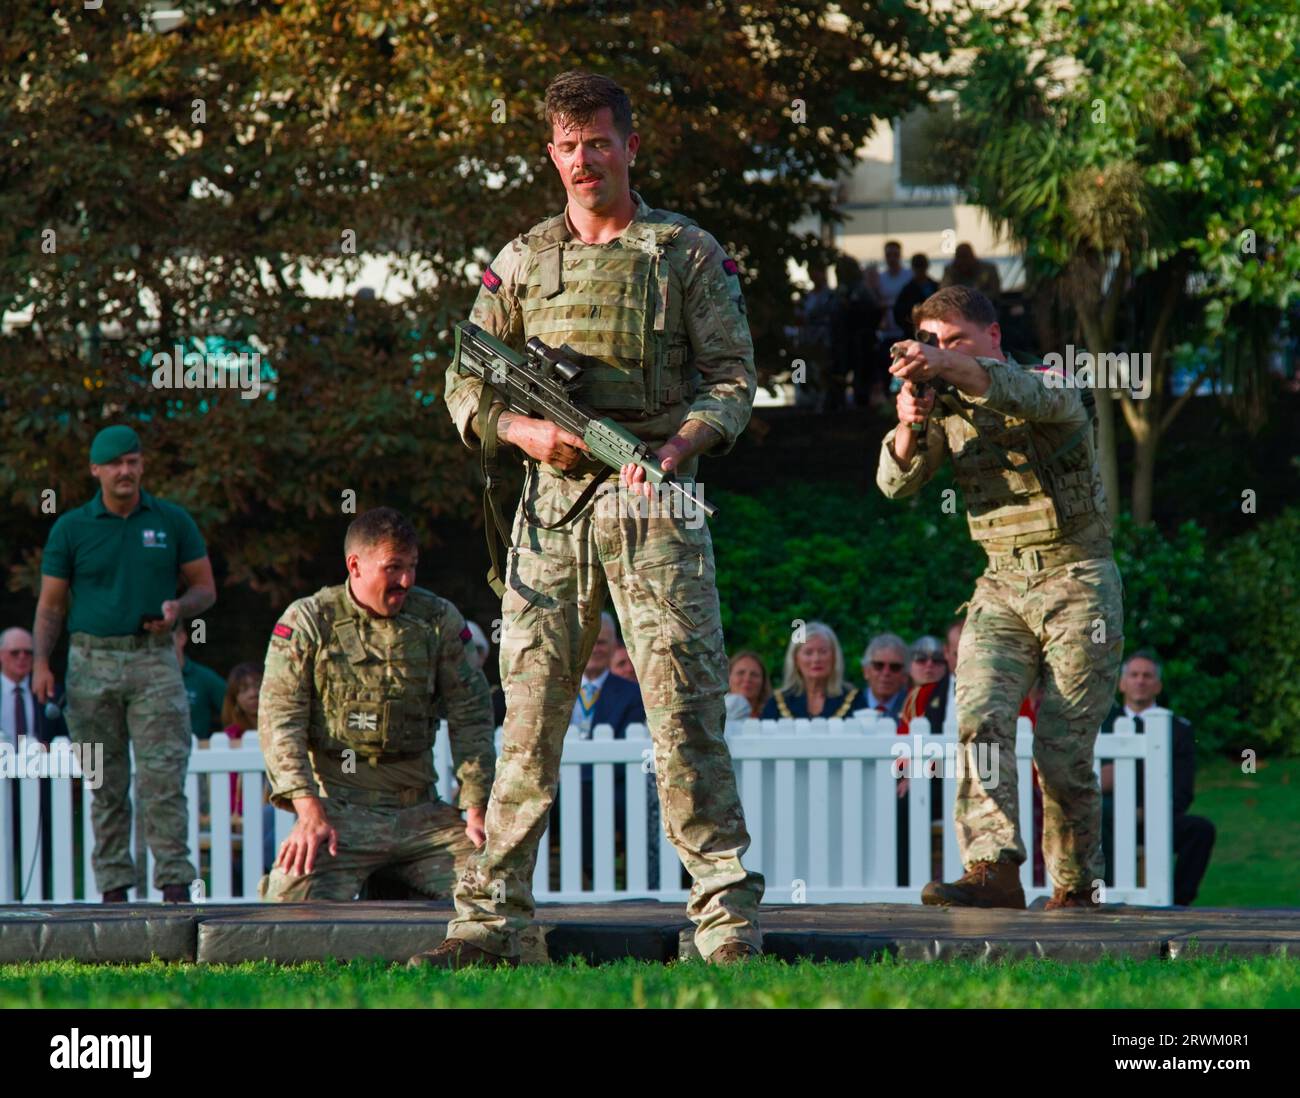 Royal Marines Commando Display Team Soldiers With Guns Hand To Hand Fighting During An Unarmed Combat Display, Bournemouth Air Show, England UK Stock Photo